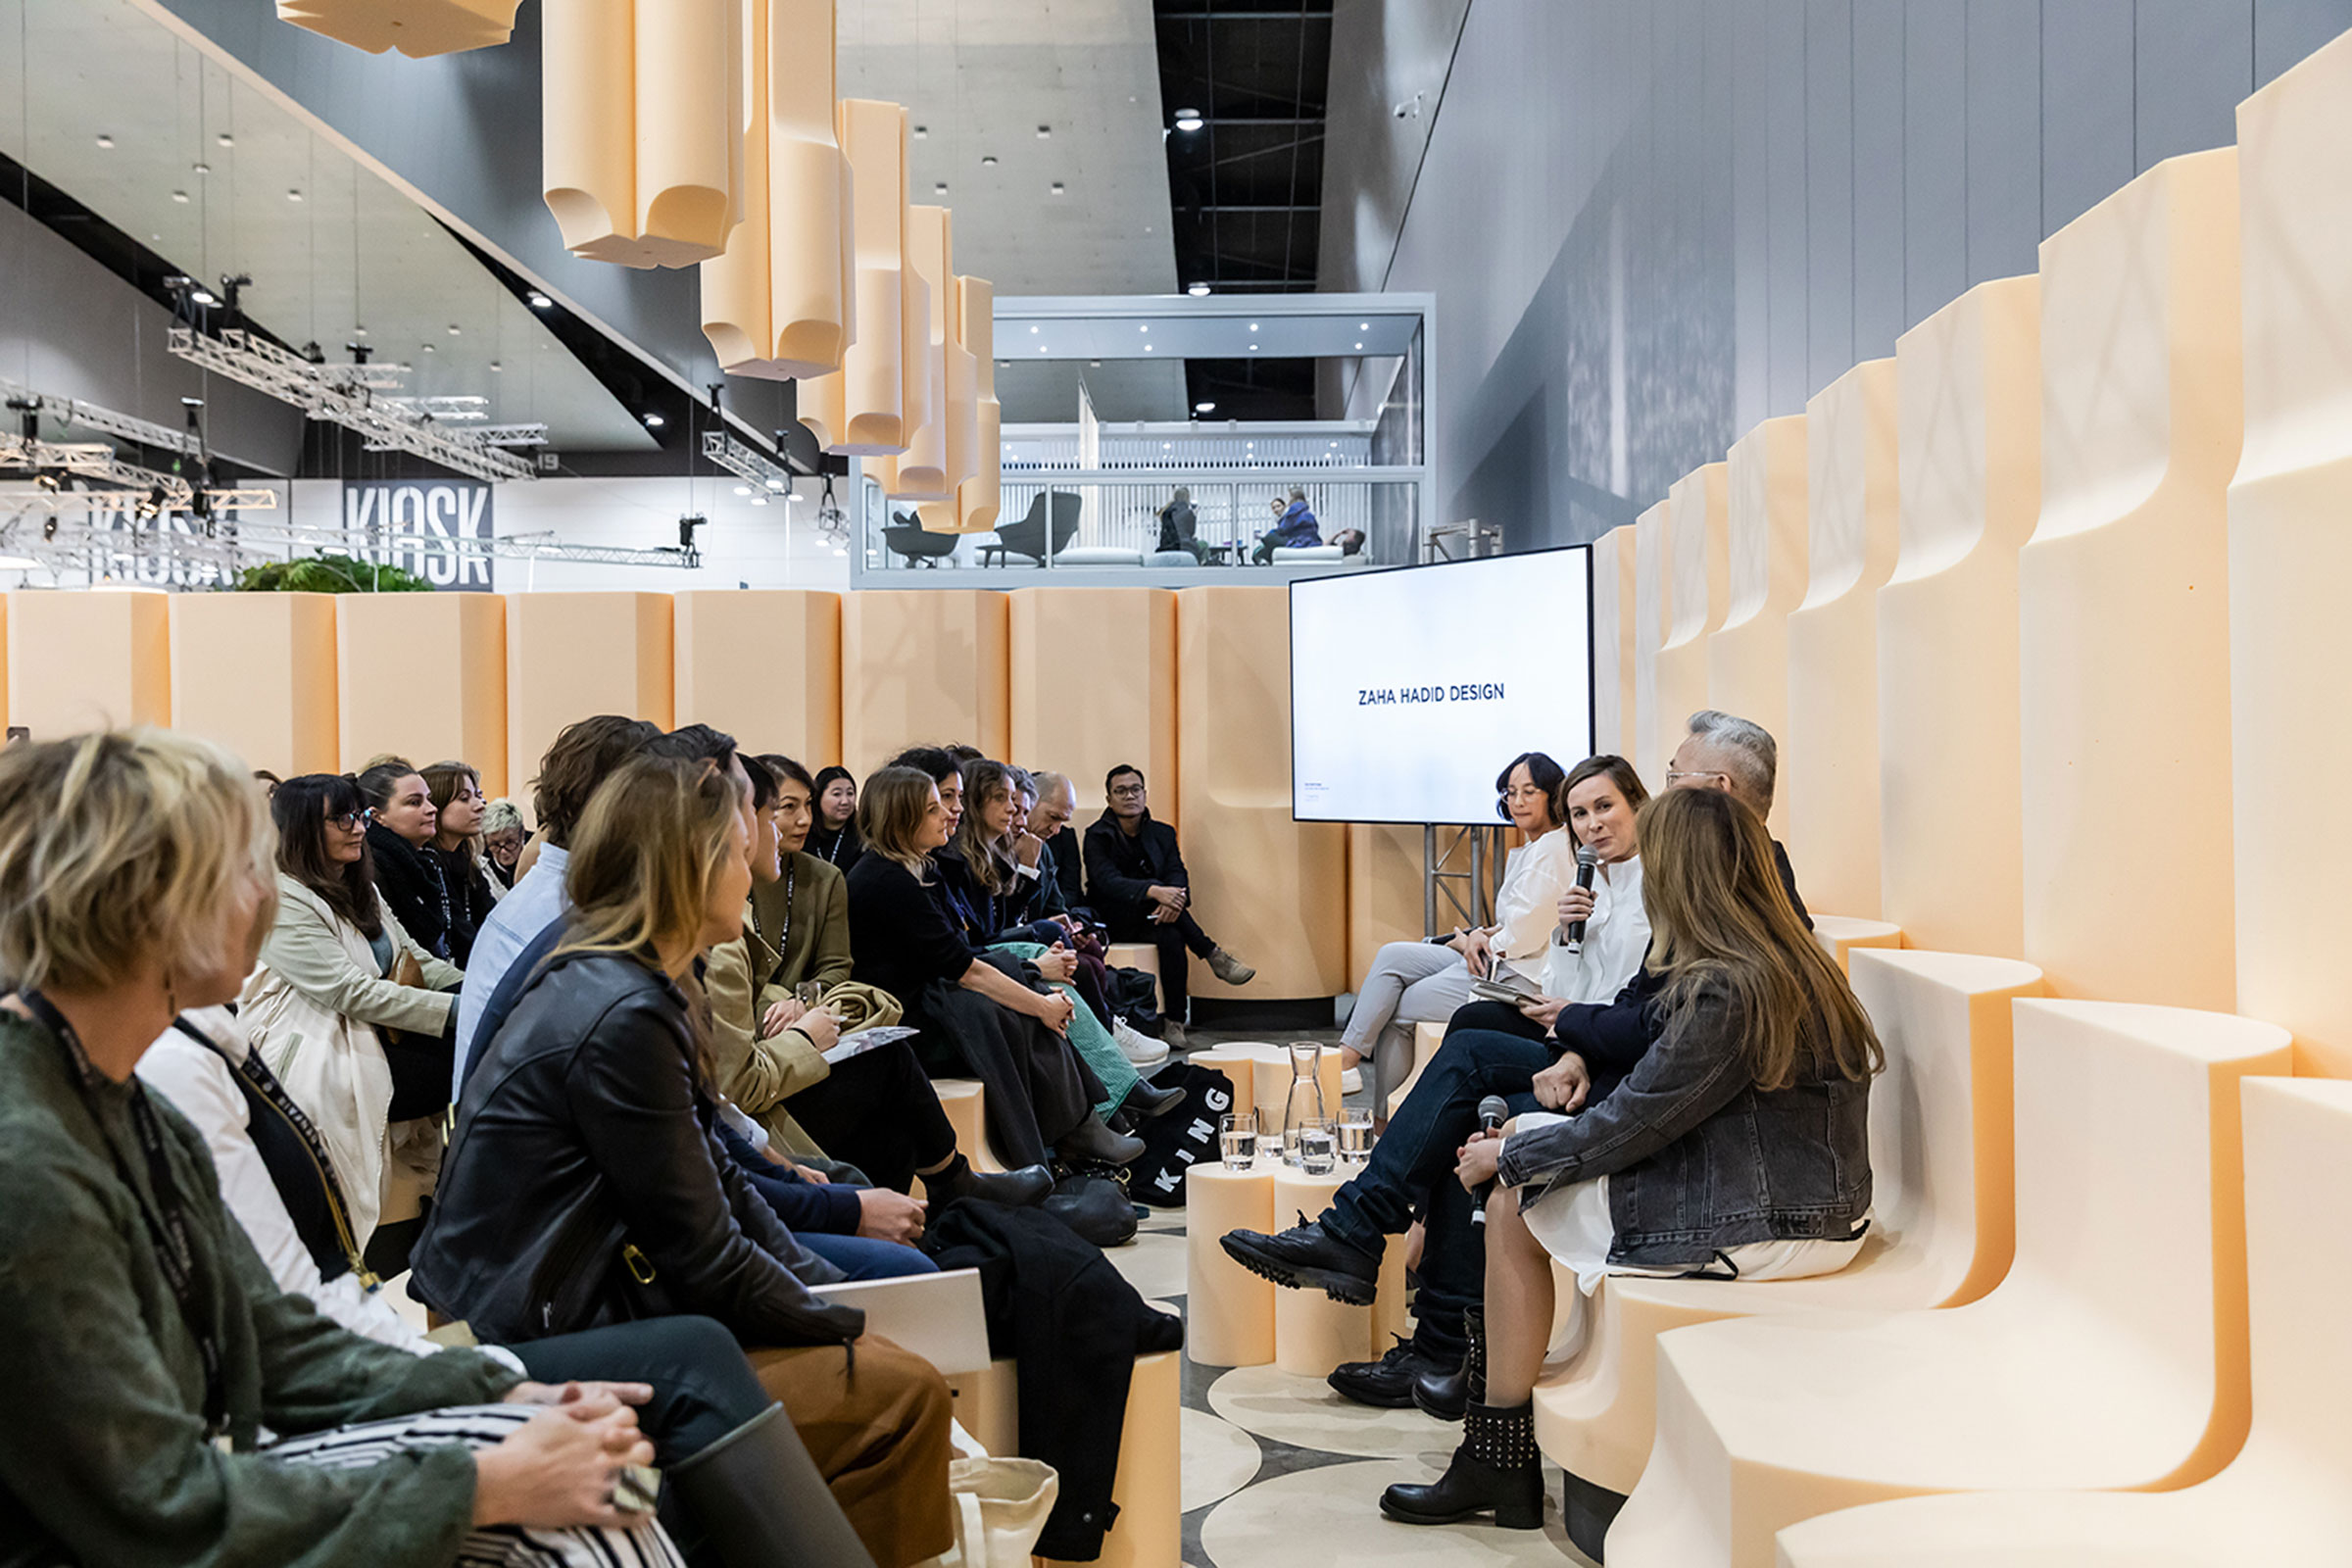  This year’s DENFAIR Speaker Series included a discussion with Woody Yao and Maha Kutay of  Zaha Hadid Design  on their first visit to Australia, moderated by Design Anthology editor-in-chief Suzy Annetta, and a session called ‘Made In Asia: Neighbou